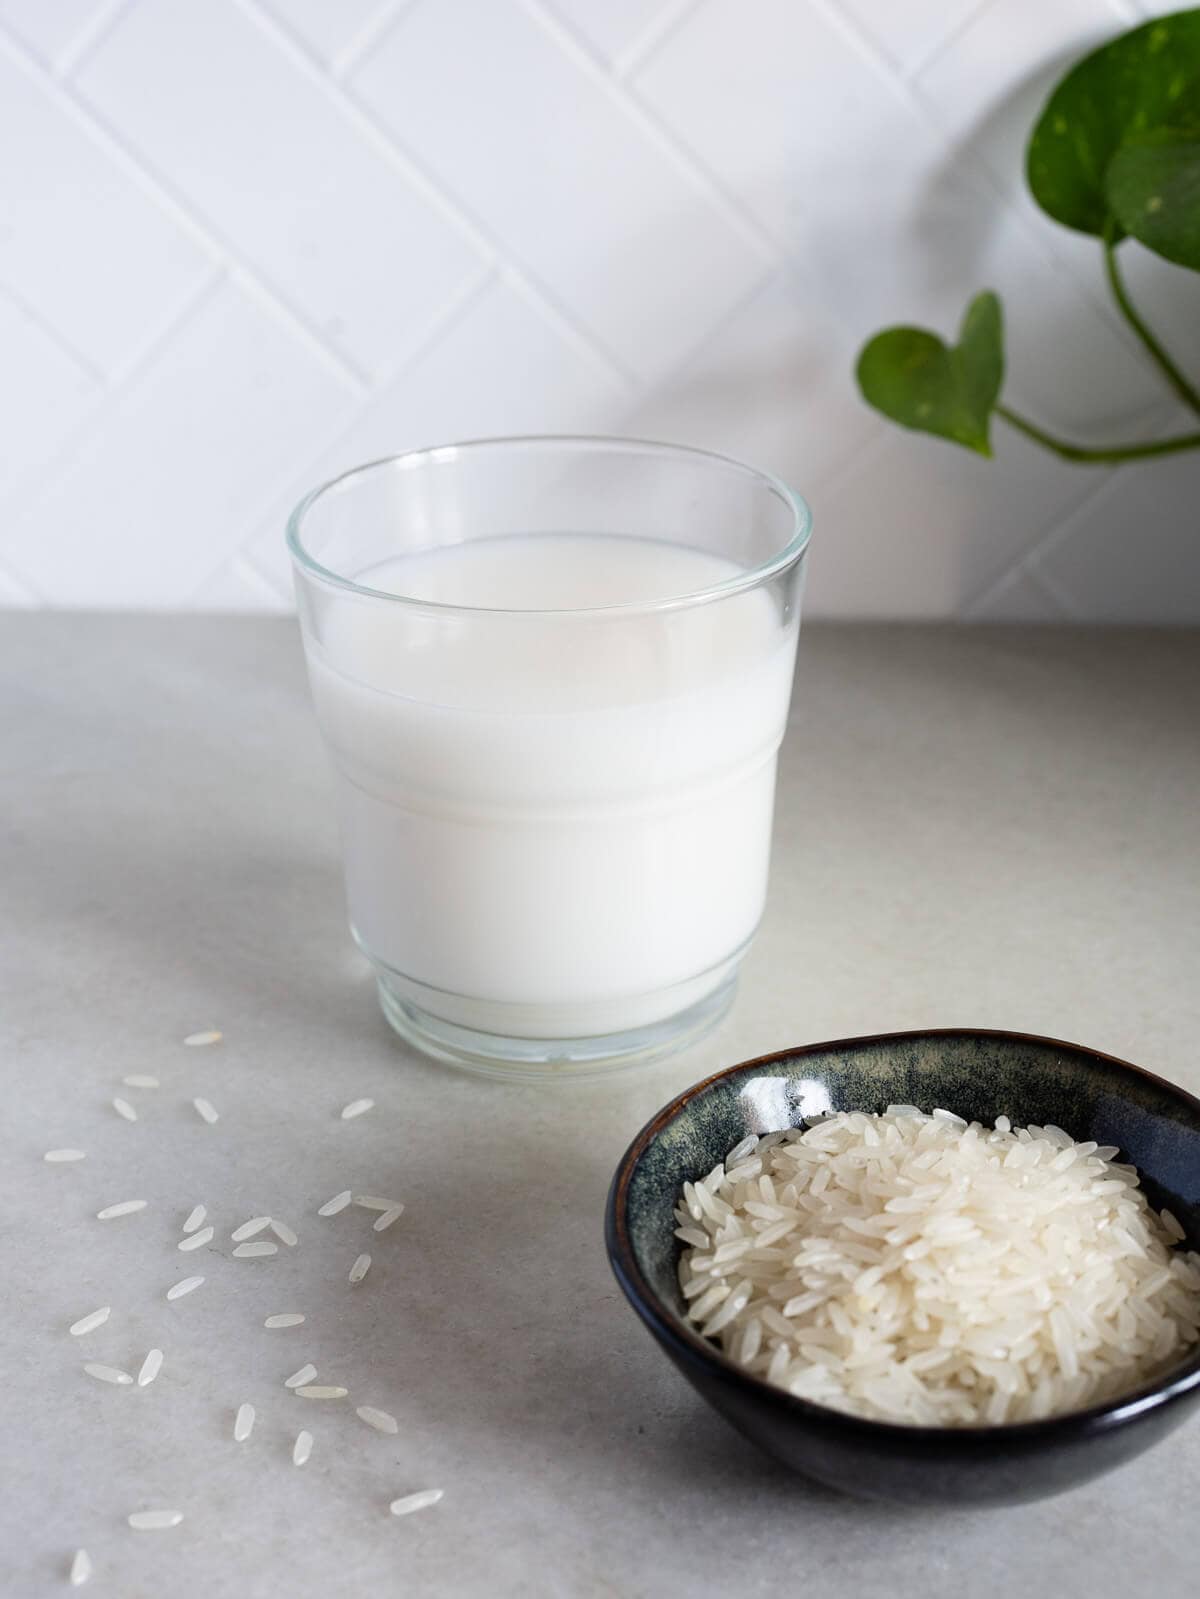 A glass of rice milk next to a bowl of uncooked white rice grains.